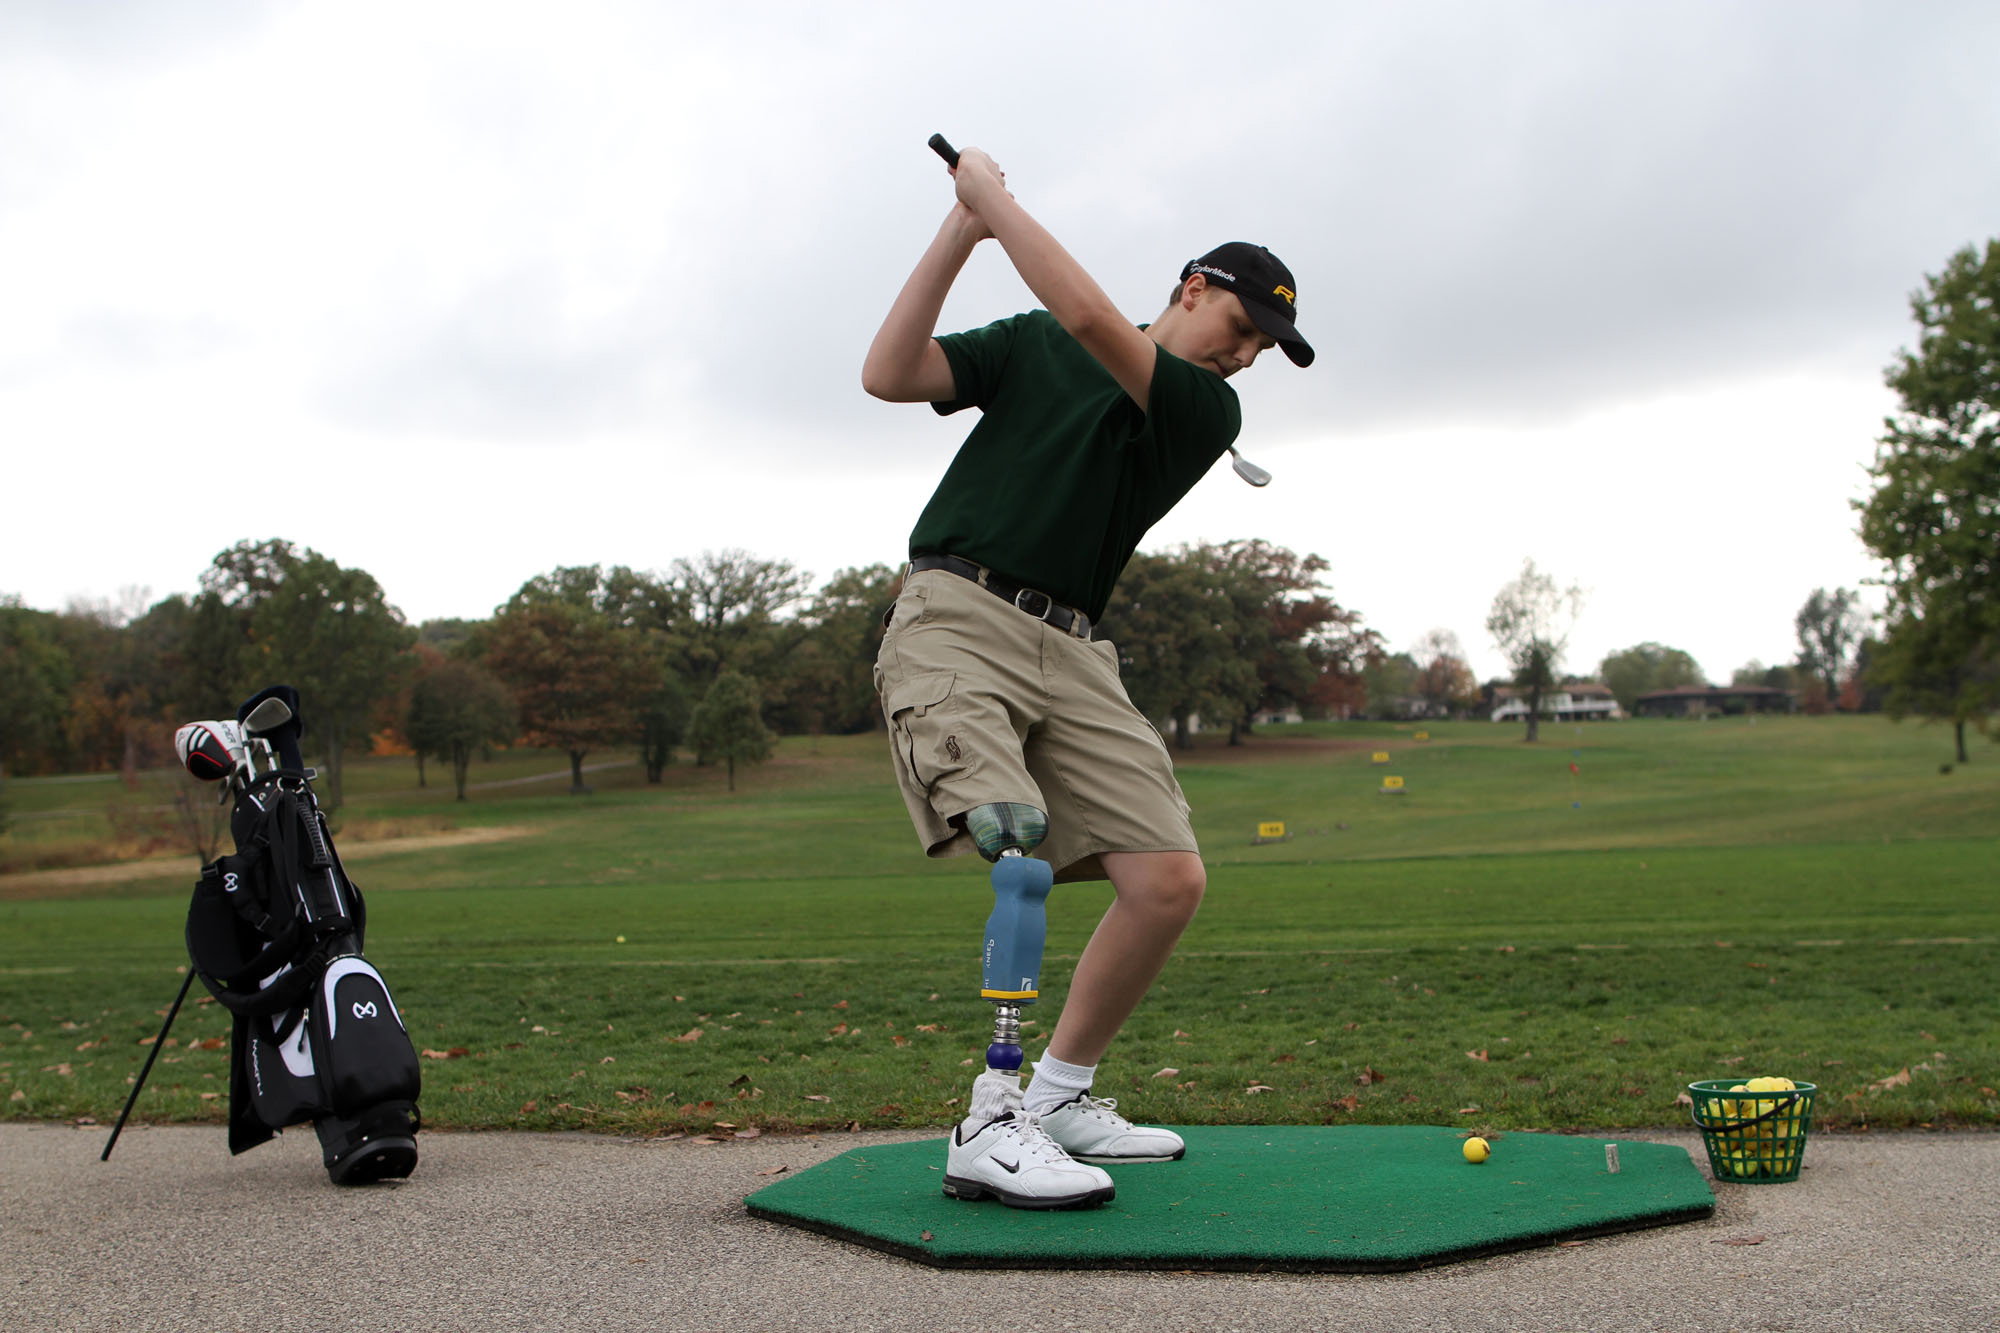  Drew Wall practices at the Ellis Golf Course driving range. Wall's prosthetic leg has a customized torquing mechanism at the ankle to allow Wall to fully twist while swinging his club. 